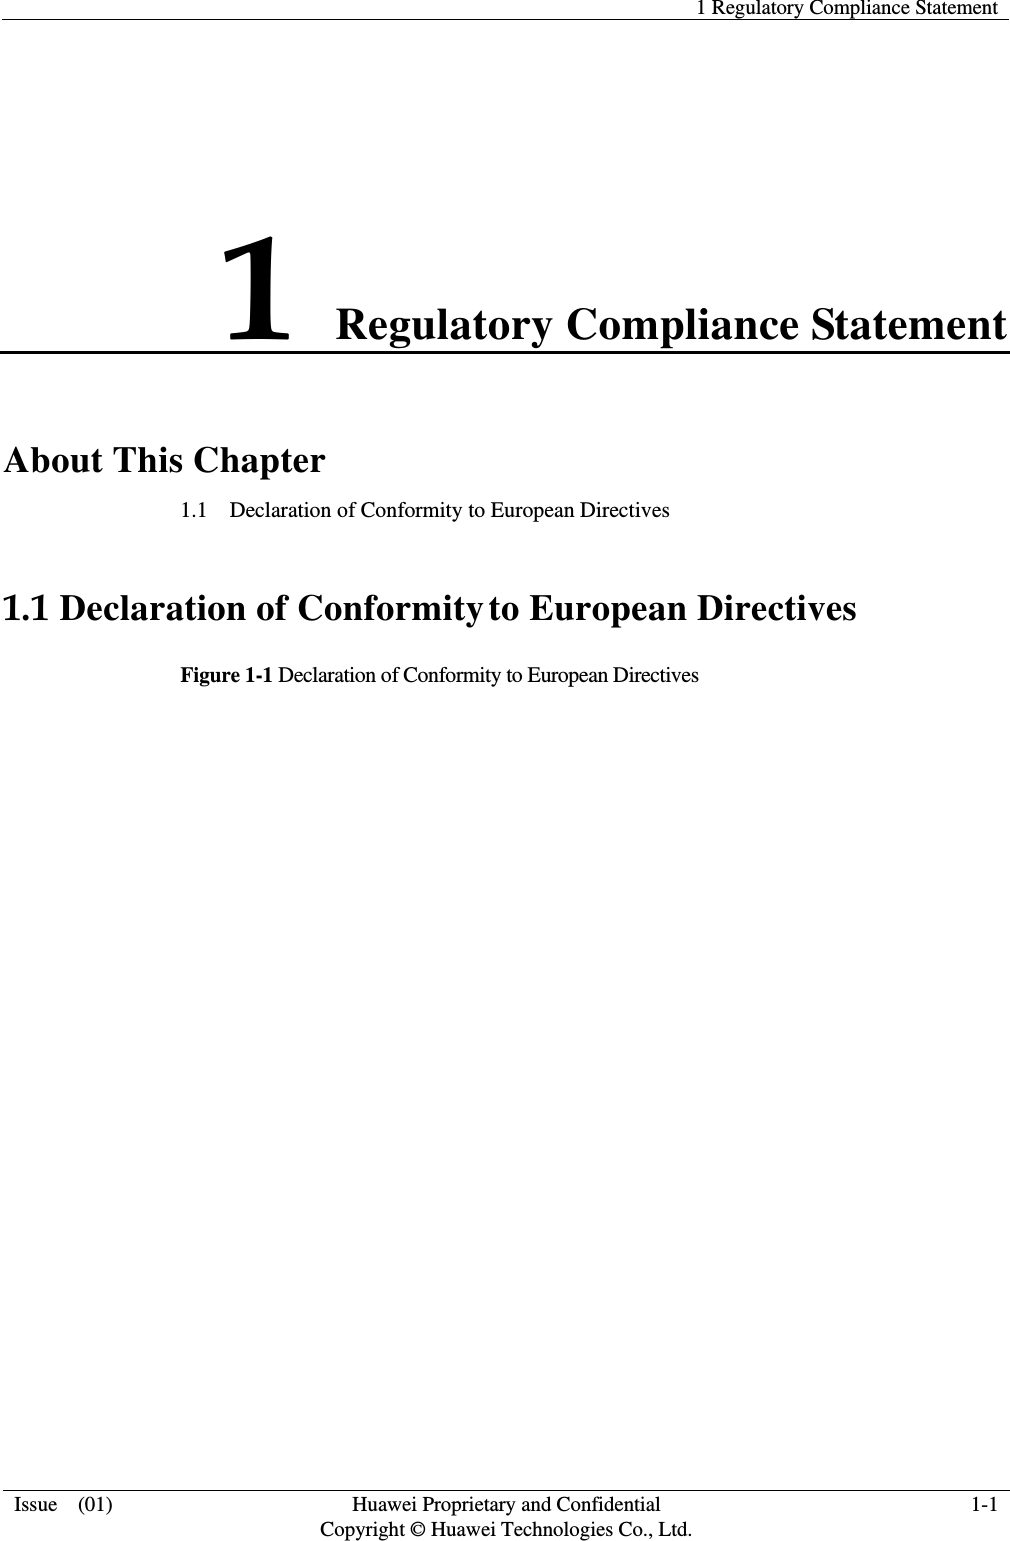   1 Regulatory Compliance Statement  Issue    (01) Huawei Proprietary and Confidential                                     Copyright © Huawei Technologies Co., Ltd. 1-1  1 Regulatory Compliance Statement About This Chapter 1.1    Declaration of Conformity to European Directives 1.1 Declaration of Conformity to European Directives Figure 1-1 Declaration of Conformity to European Directives     